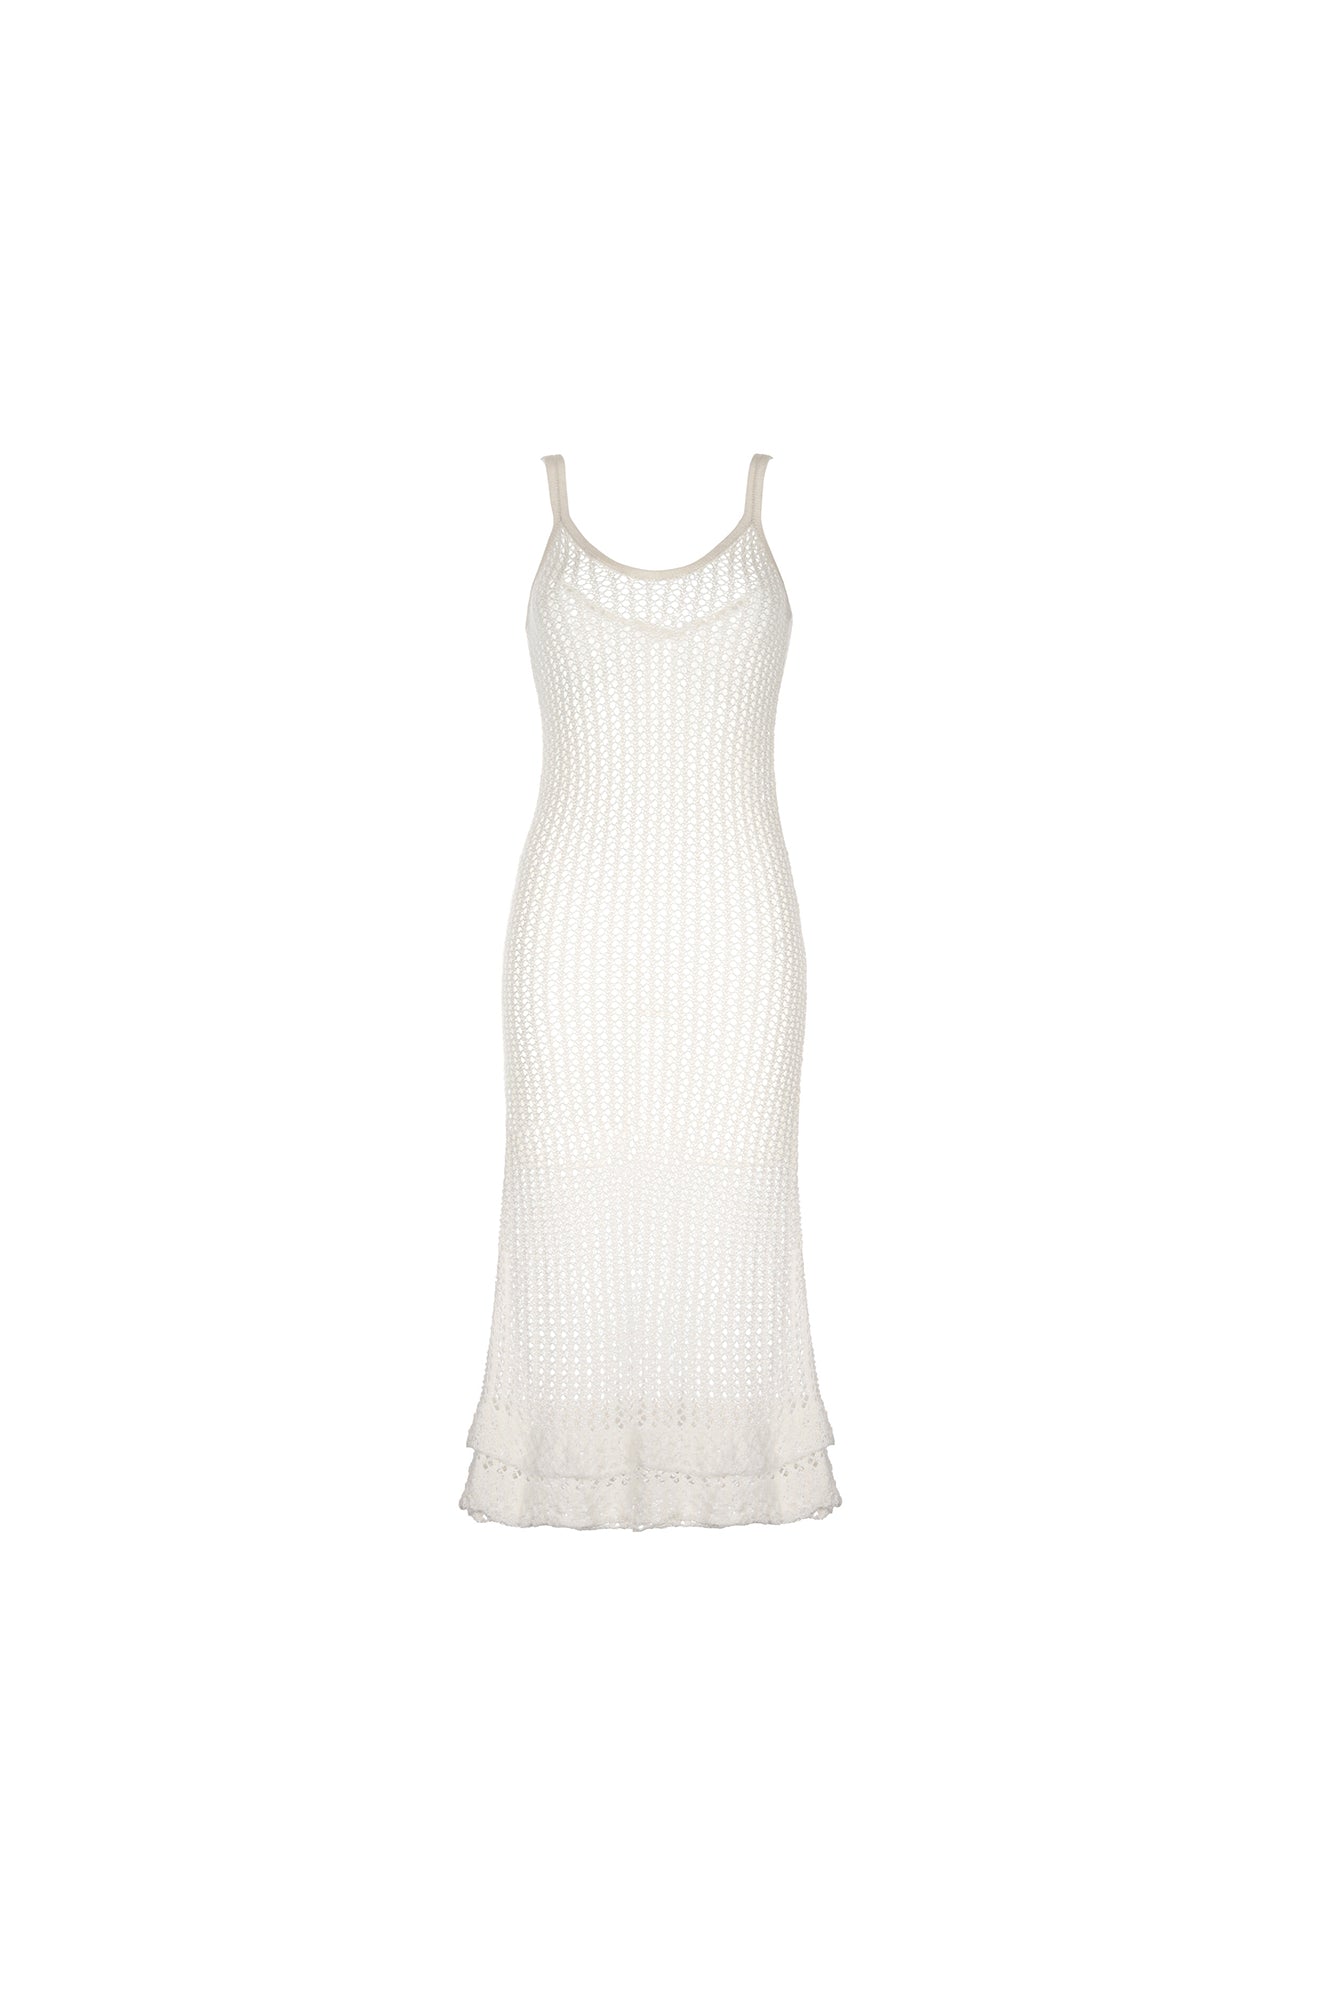 Aldana is a cami style dress designed to subtly hug the body, flattering all figures. A go-to cover-up that is easily dressed up or down. Features a double hem detail. Handmade crochet by Peruvian artisans. 100% cotton. Made in Peru.  Edit alt text